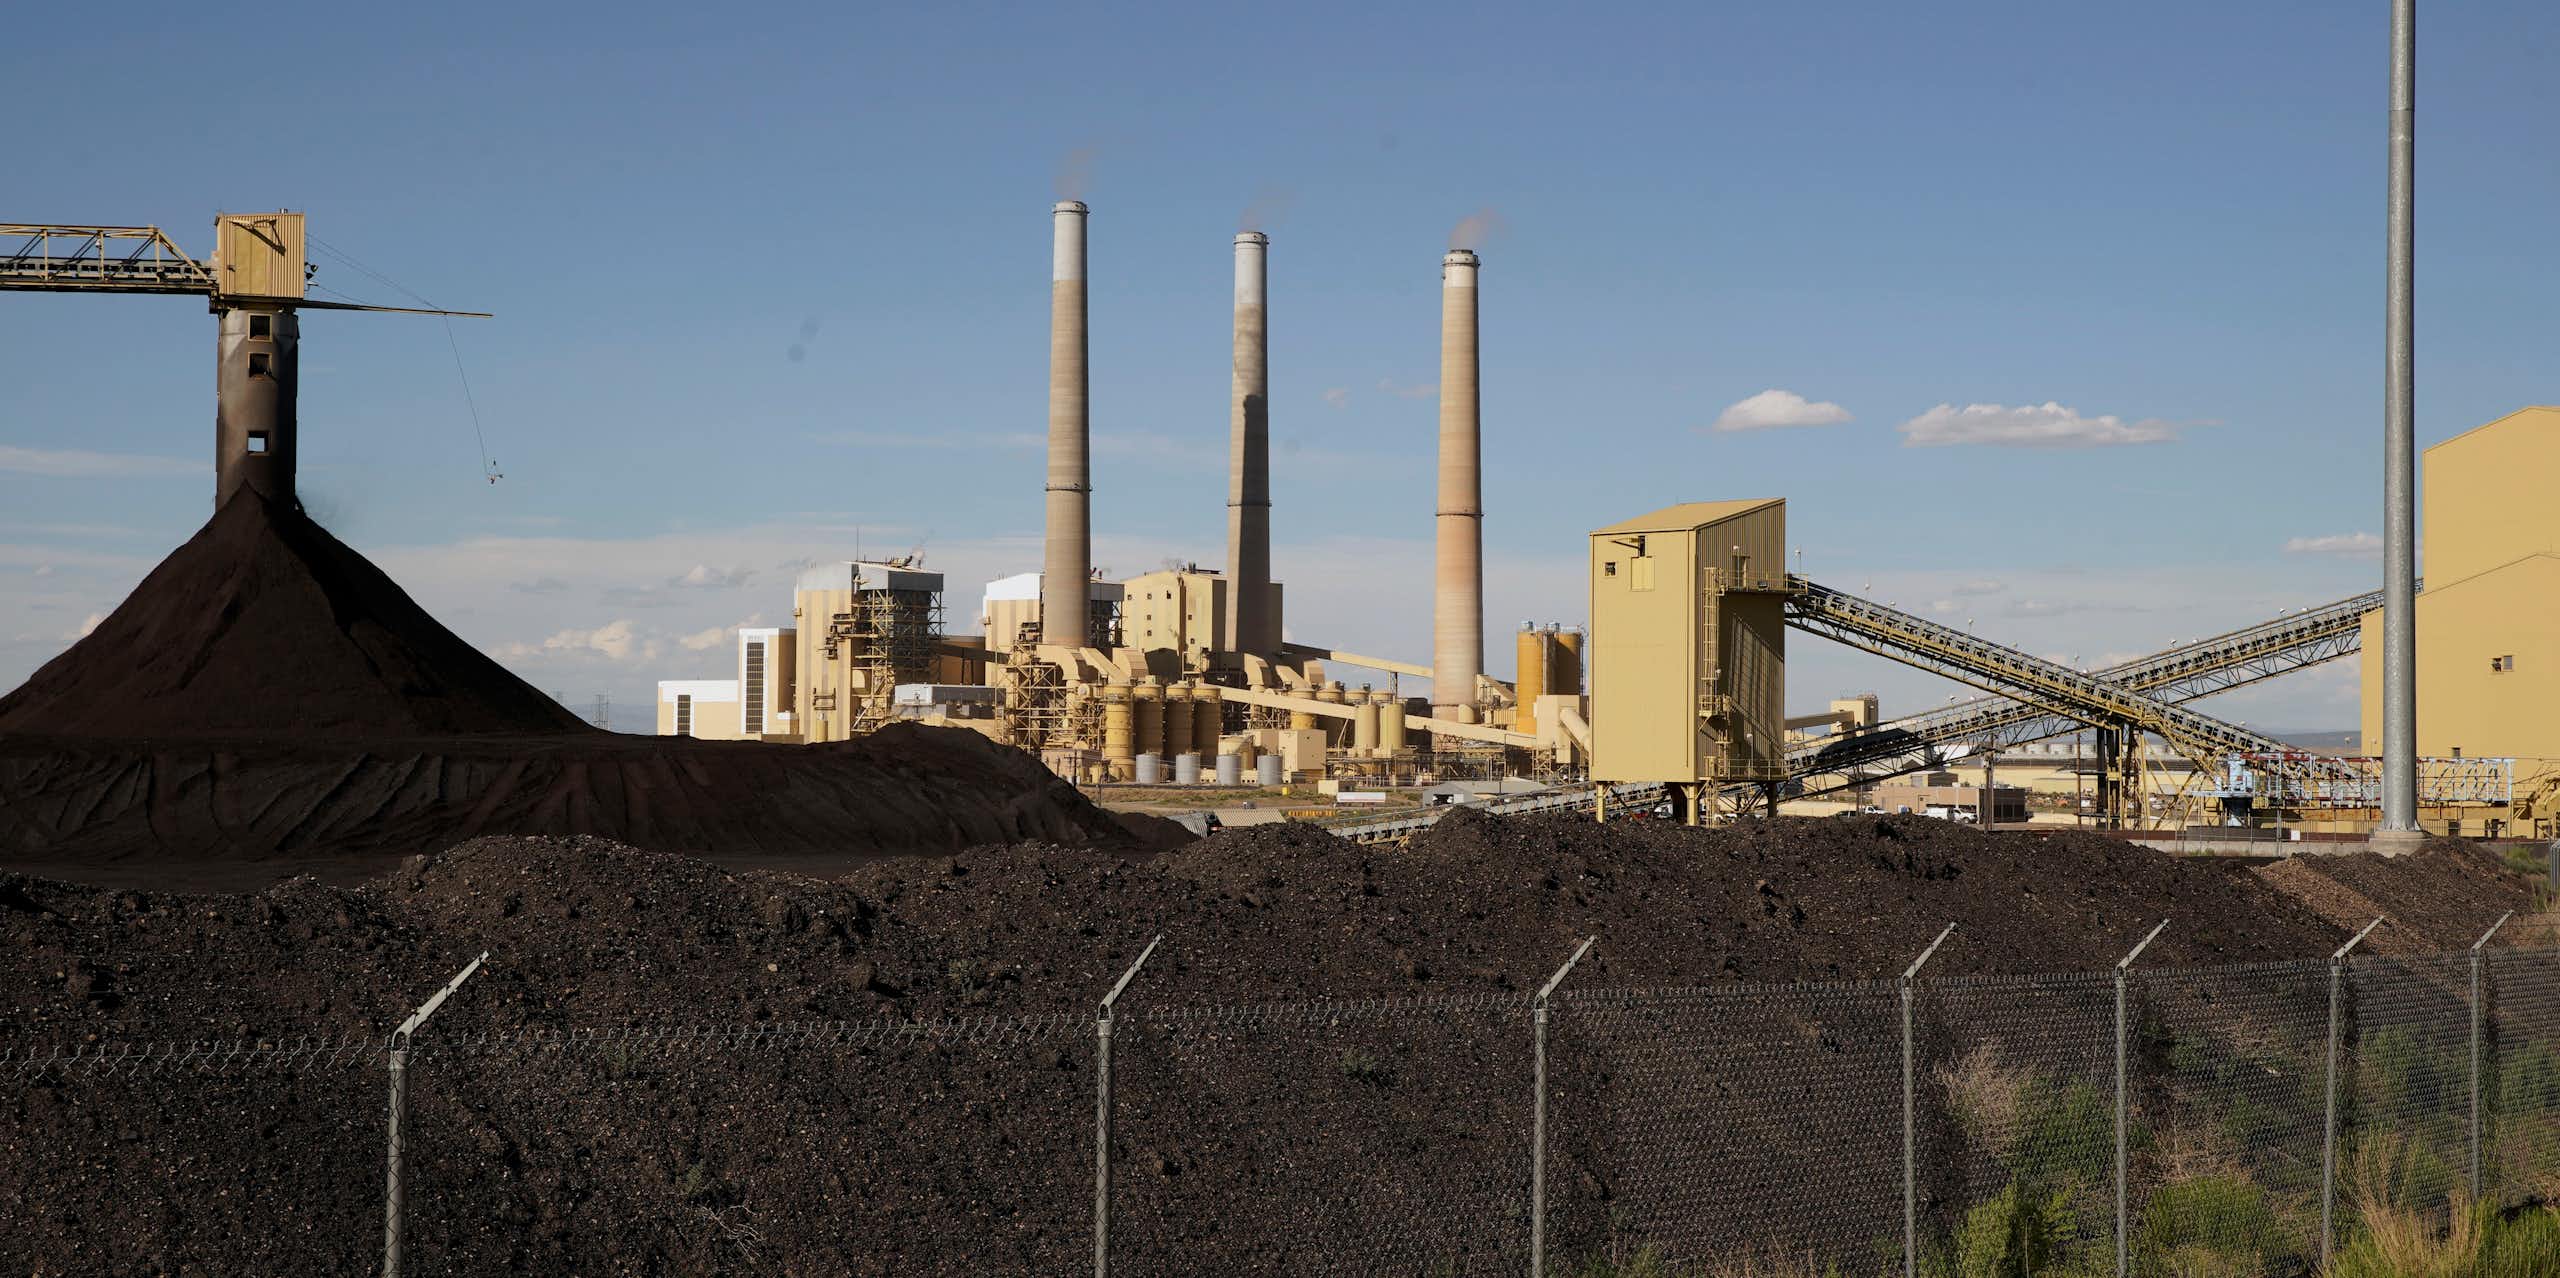 heaps of coal in front of a power plant with three tall smokestacks